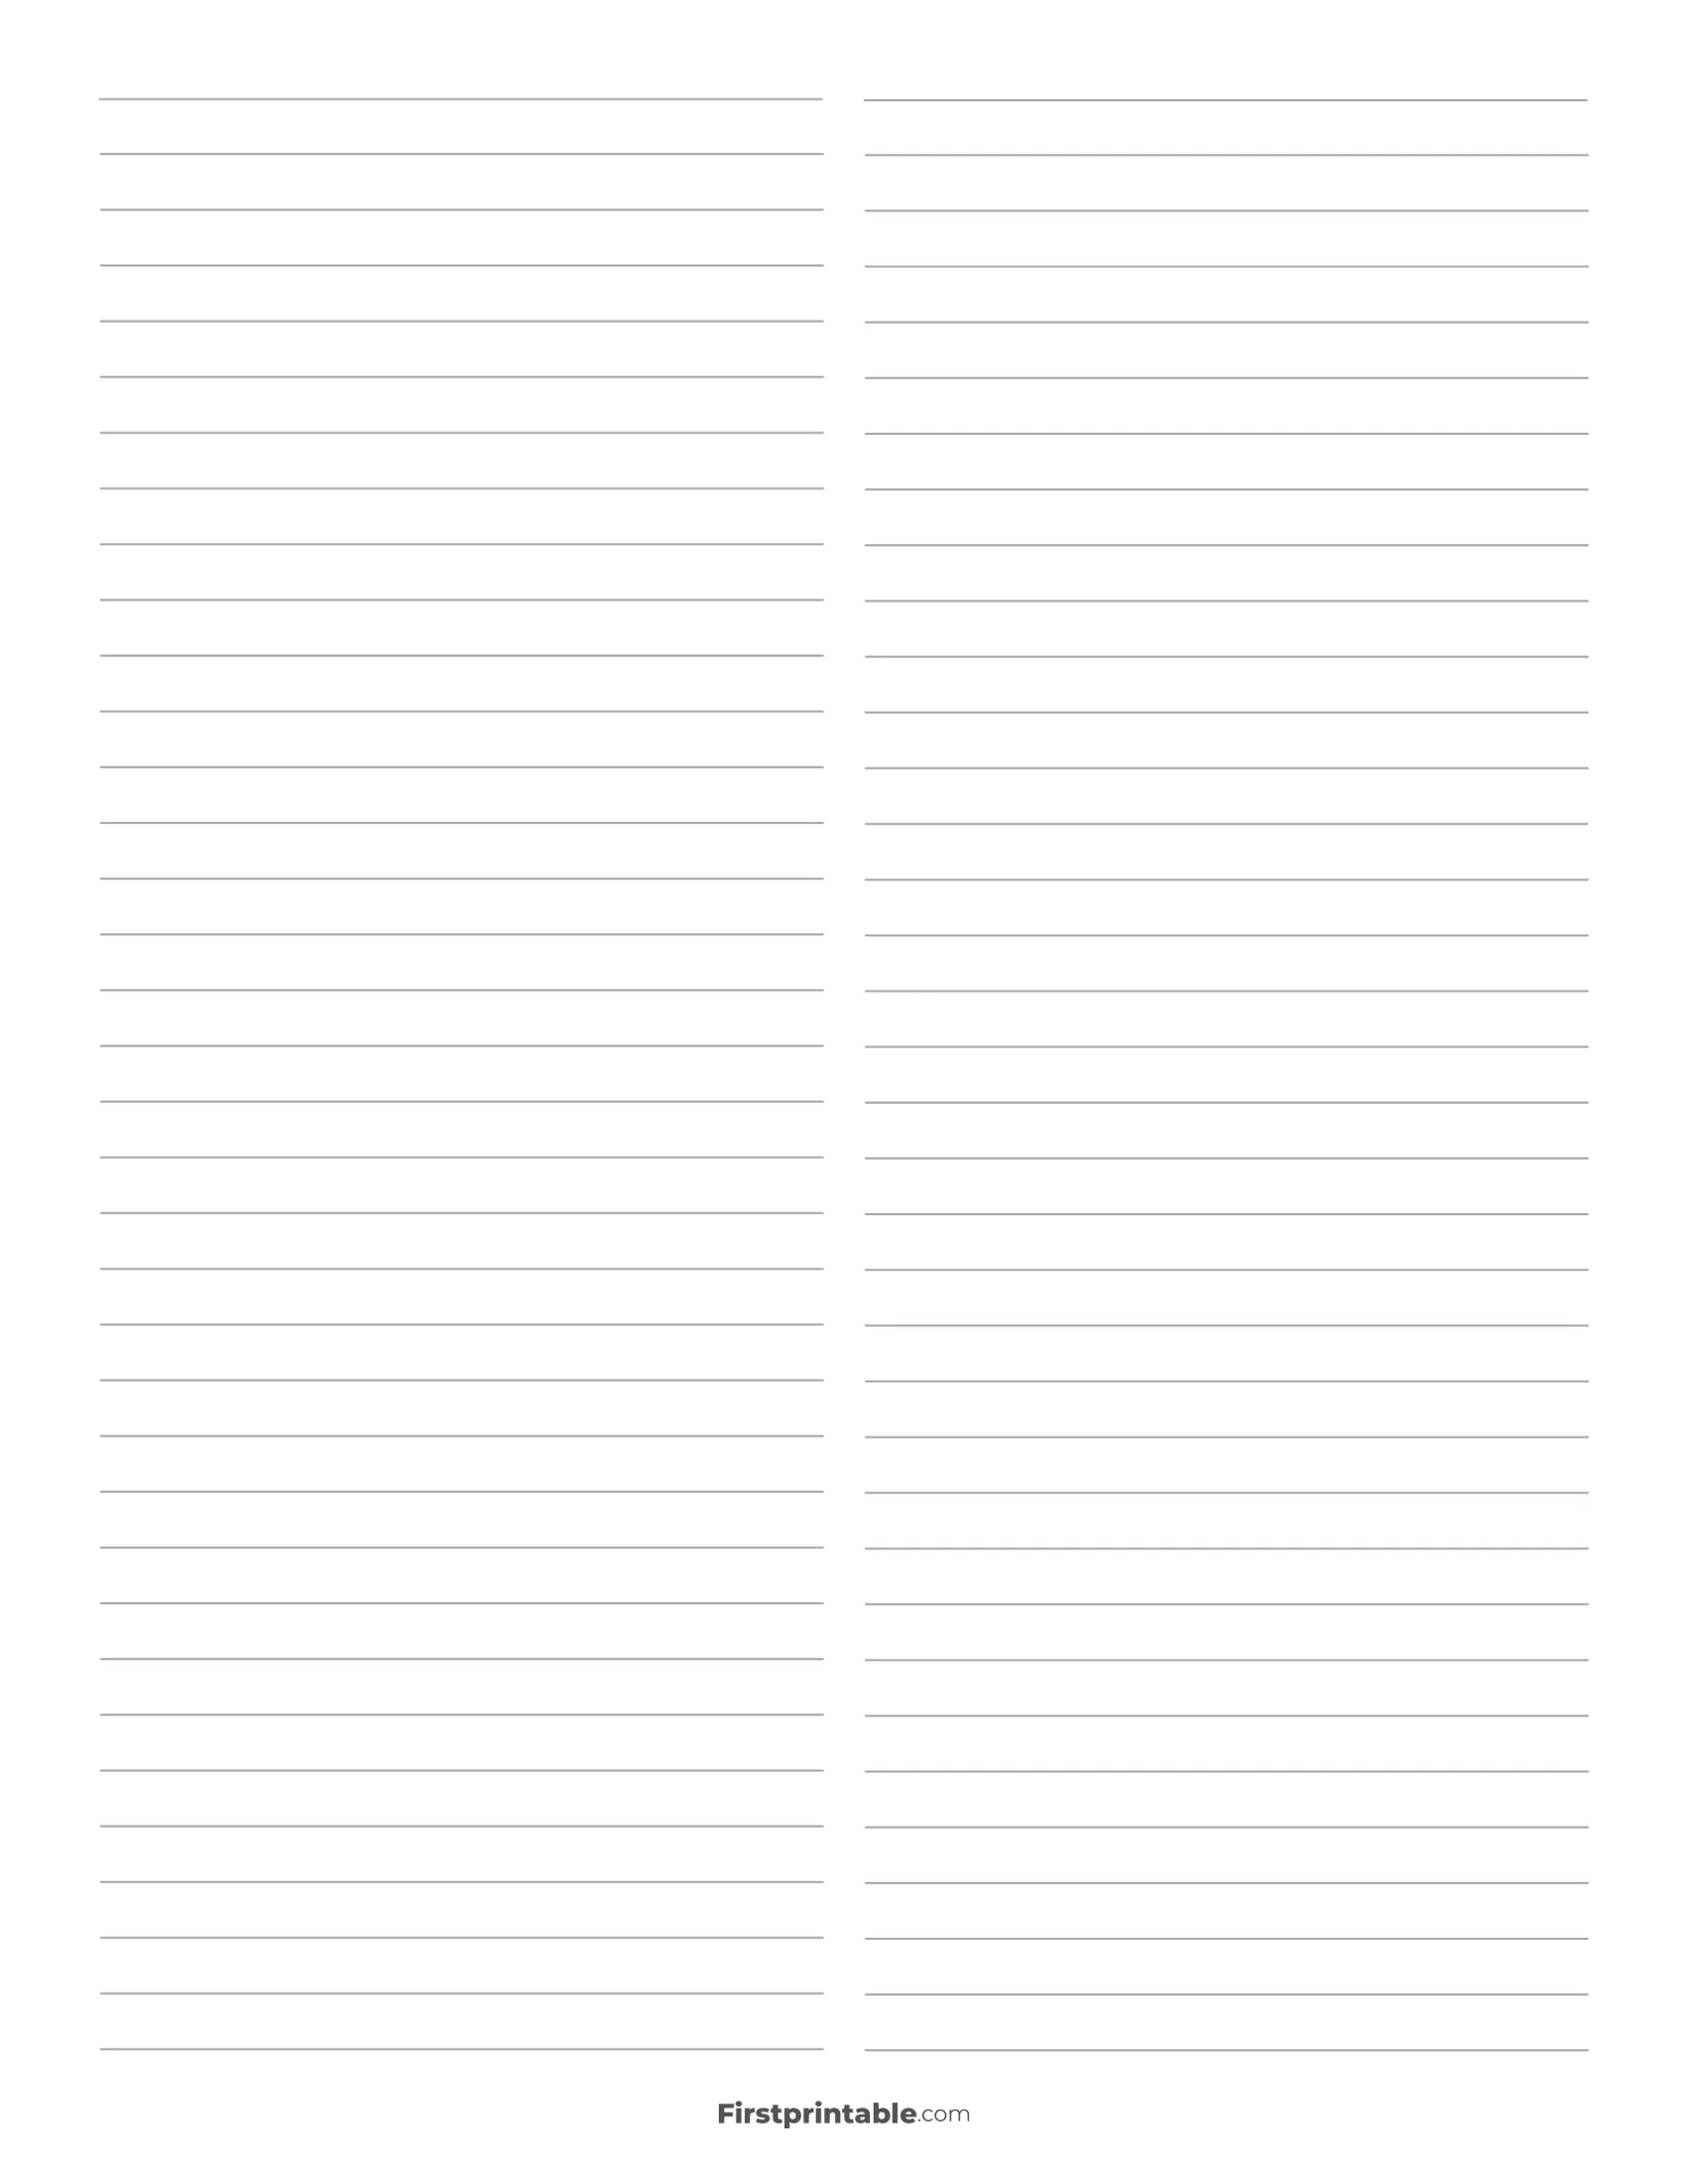 Printable Lined Paper - 2 Column